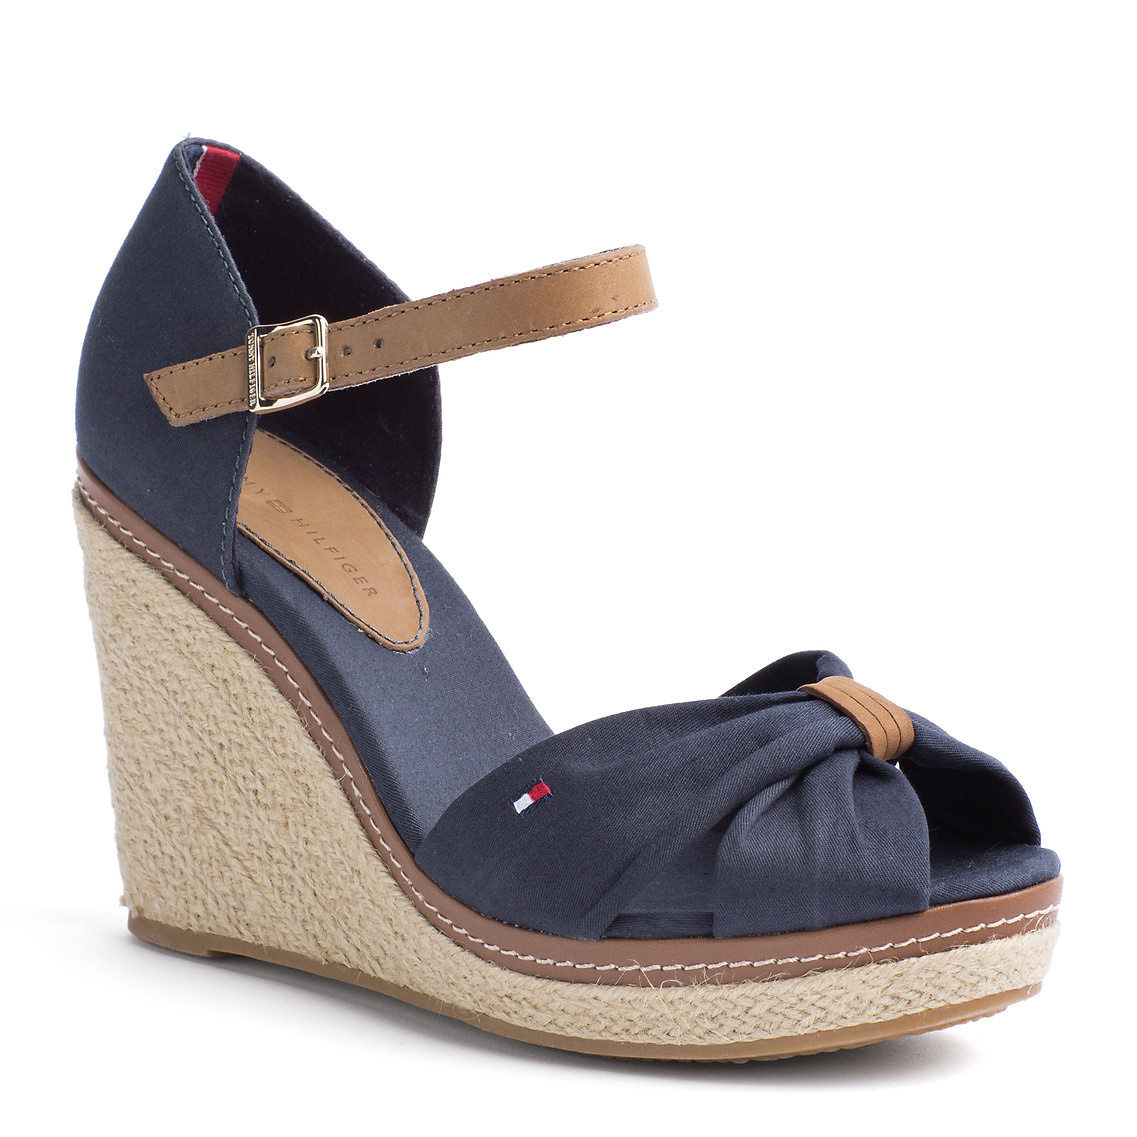 tommy hilfiger blue emery espadrilles product 1 16803387 0 754880855 normal